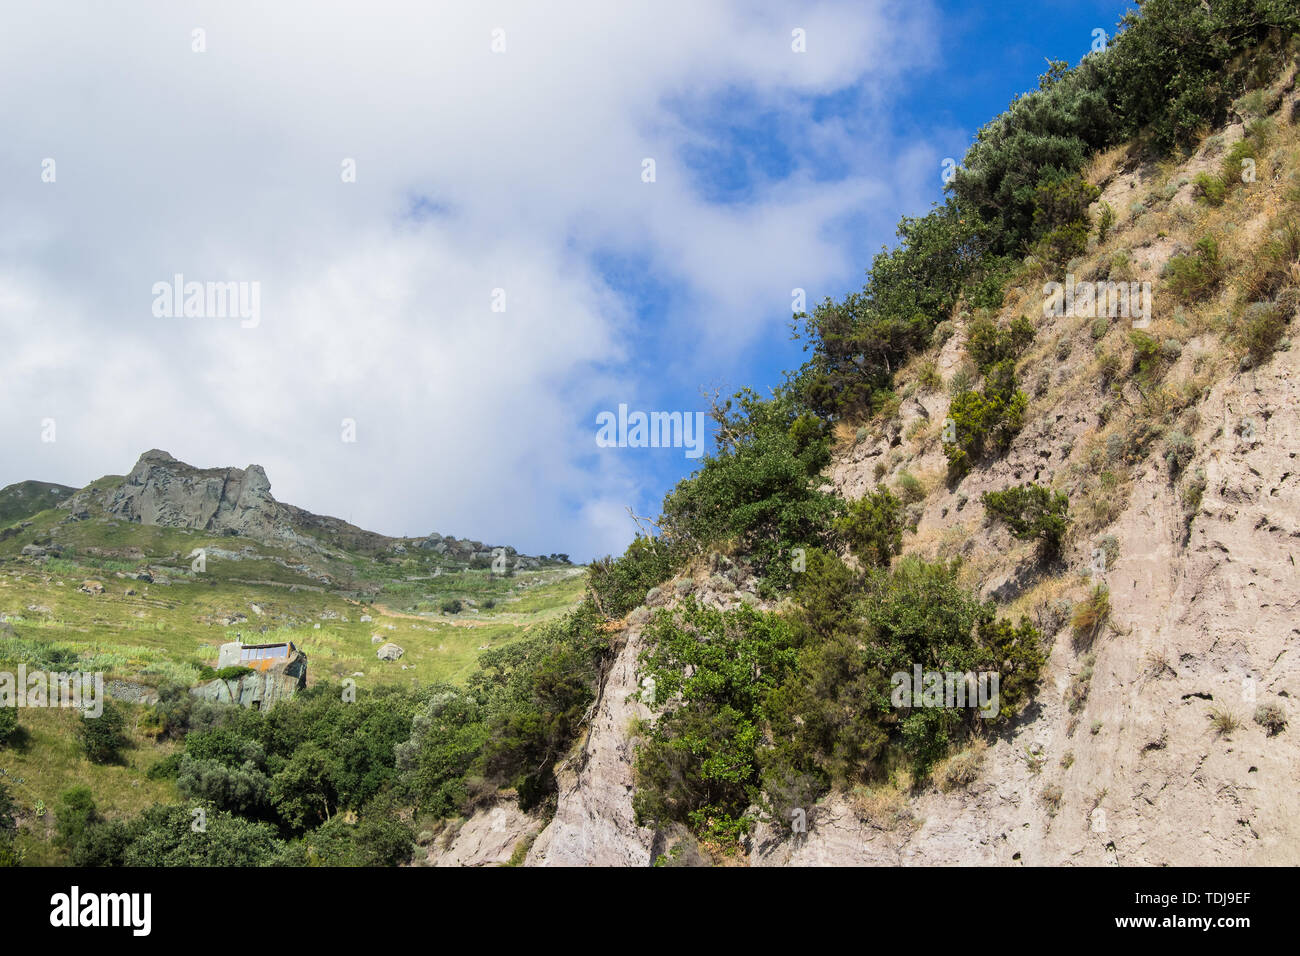 Italian mountains and hills in the city of Ischia Stock Photo